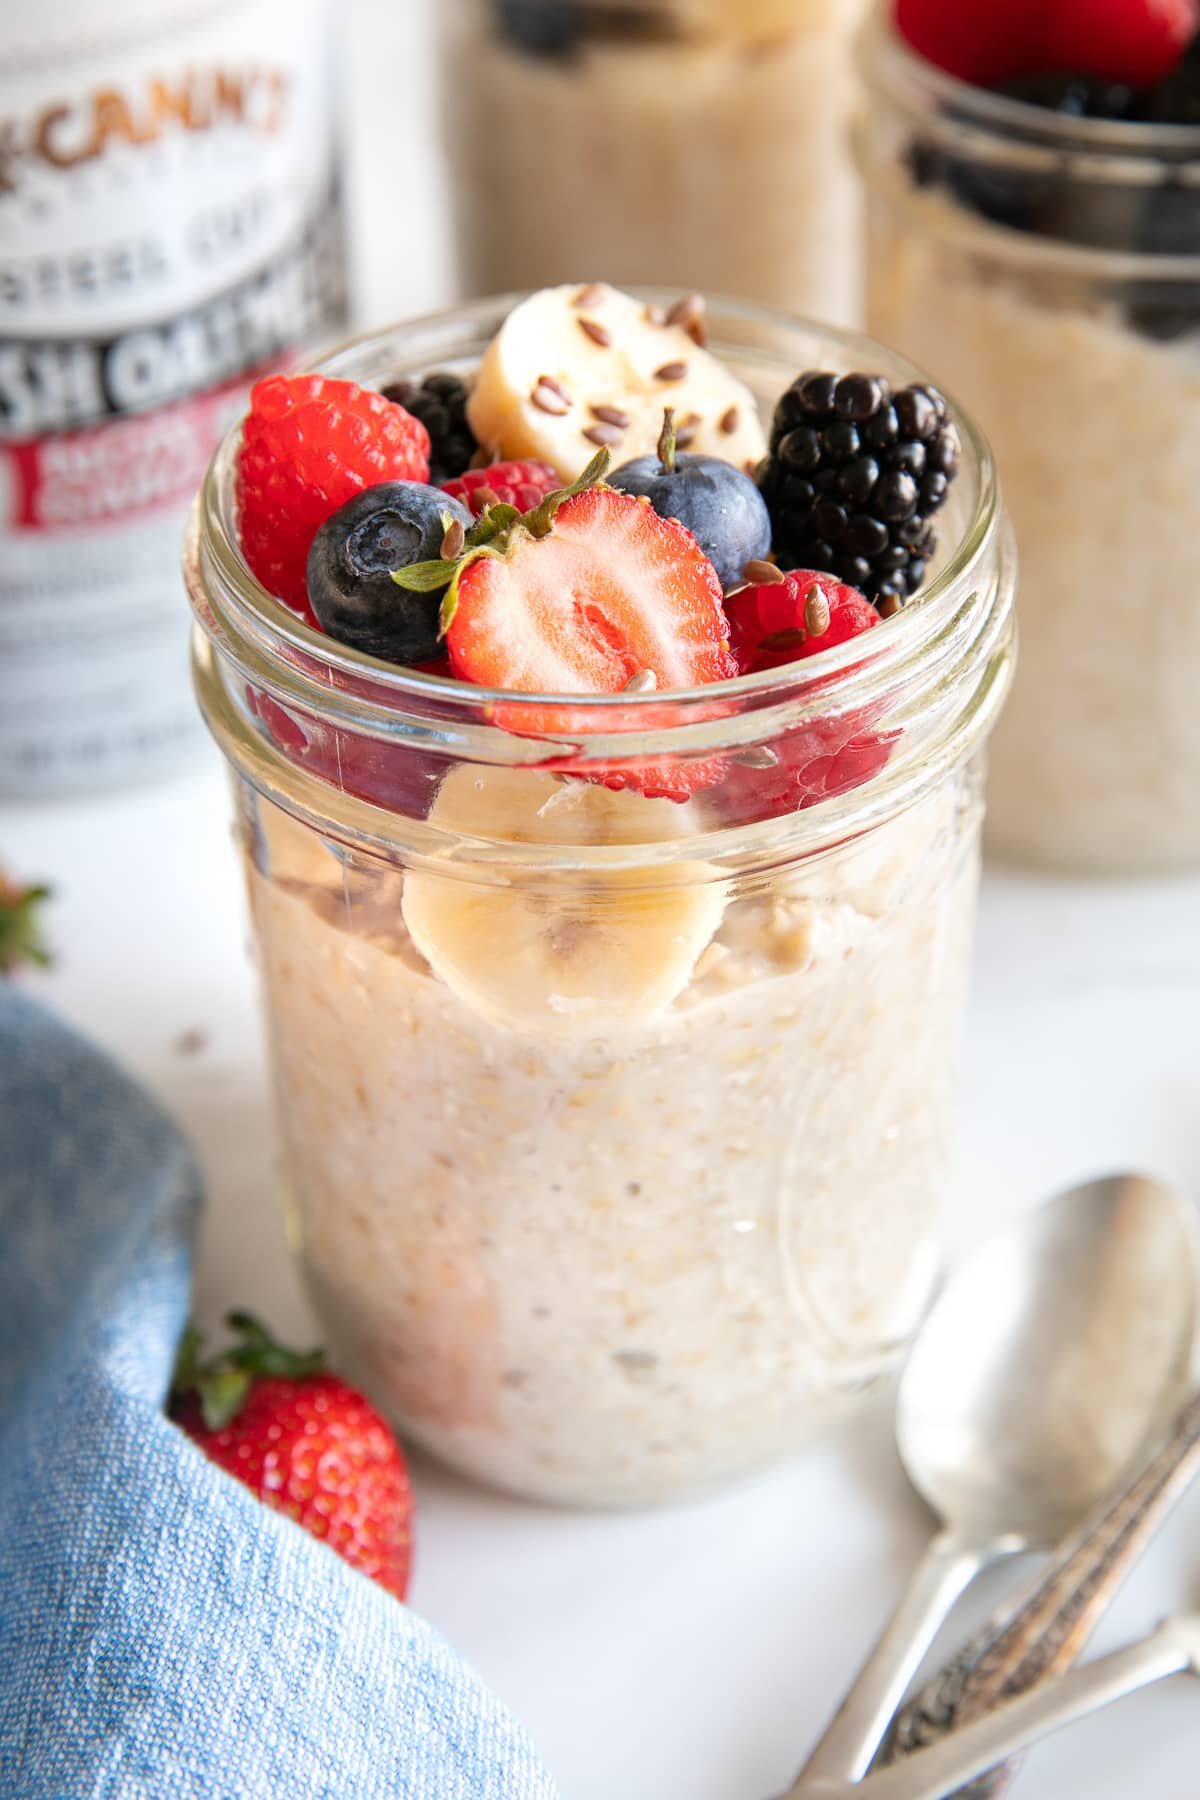 Glass mason jar filled with overnight steel cut oats and topped with sliced banana, strawberries, blueberries, raspberries, and blackberries, and sprinkled with flax seeds.